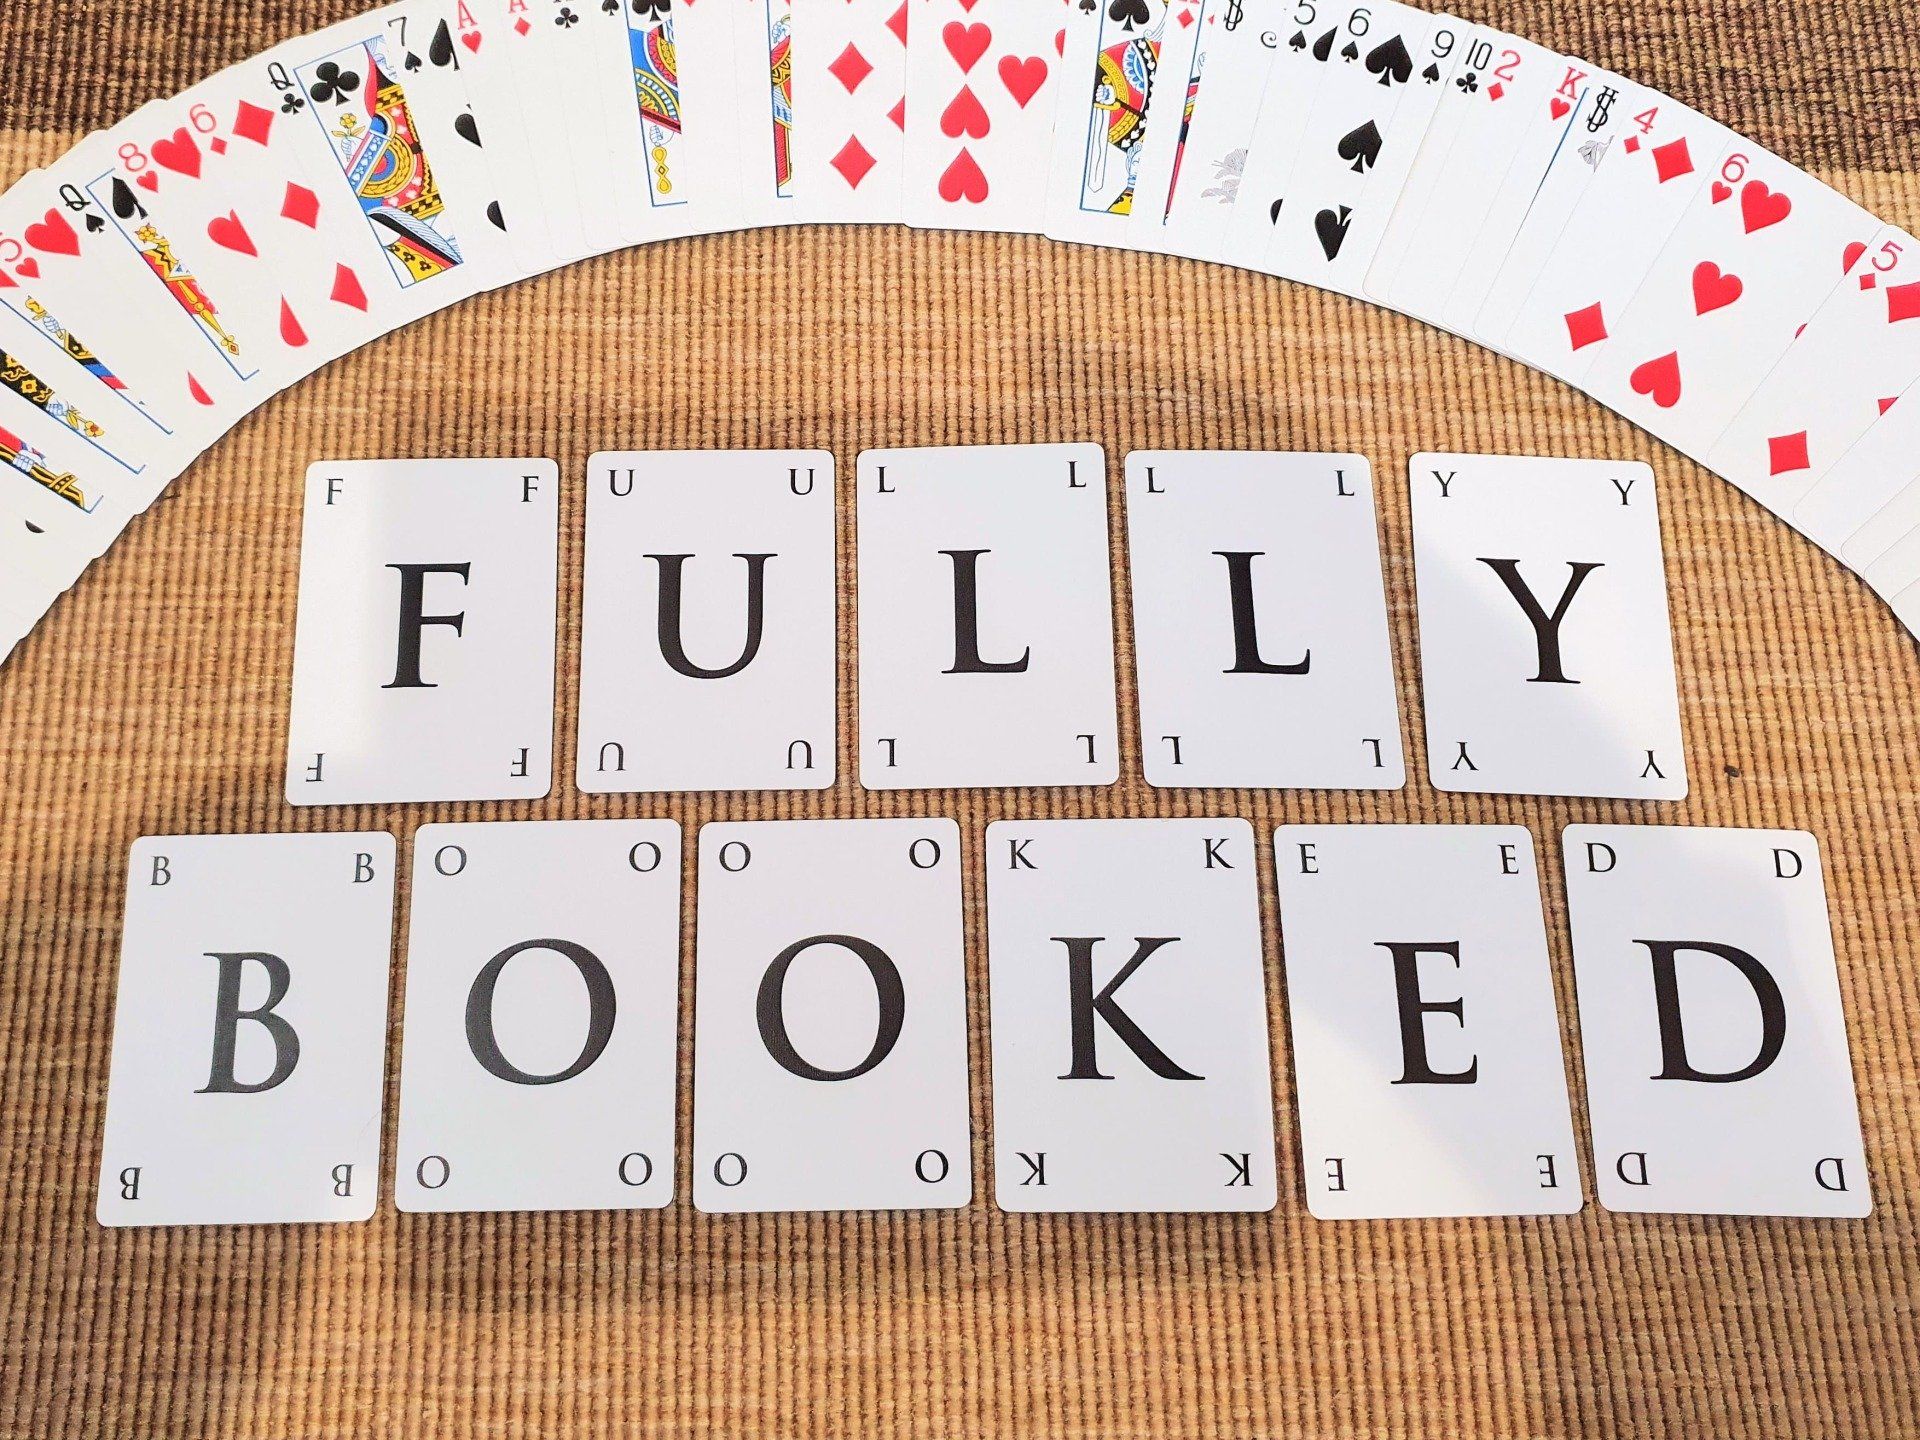 Sussex Magician fully booked